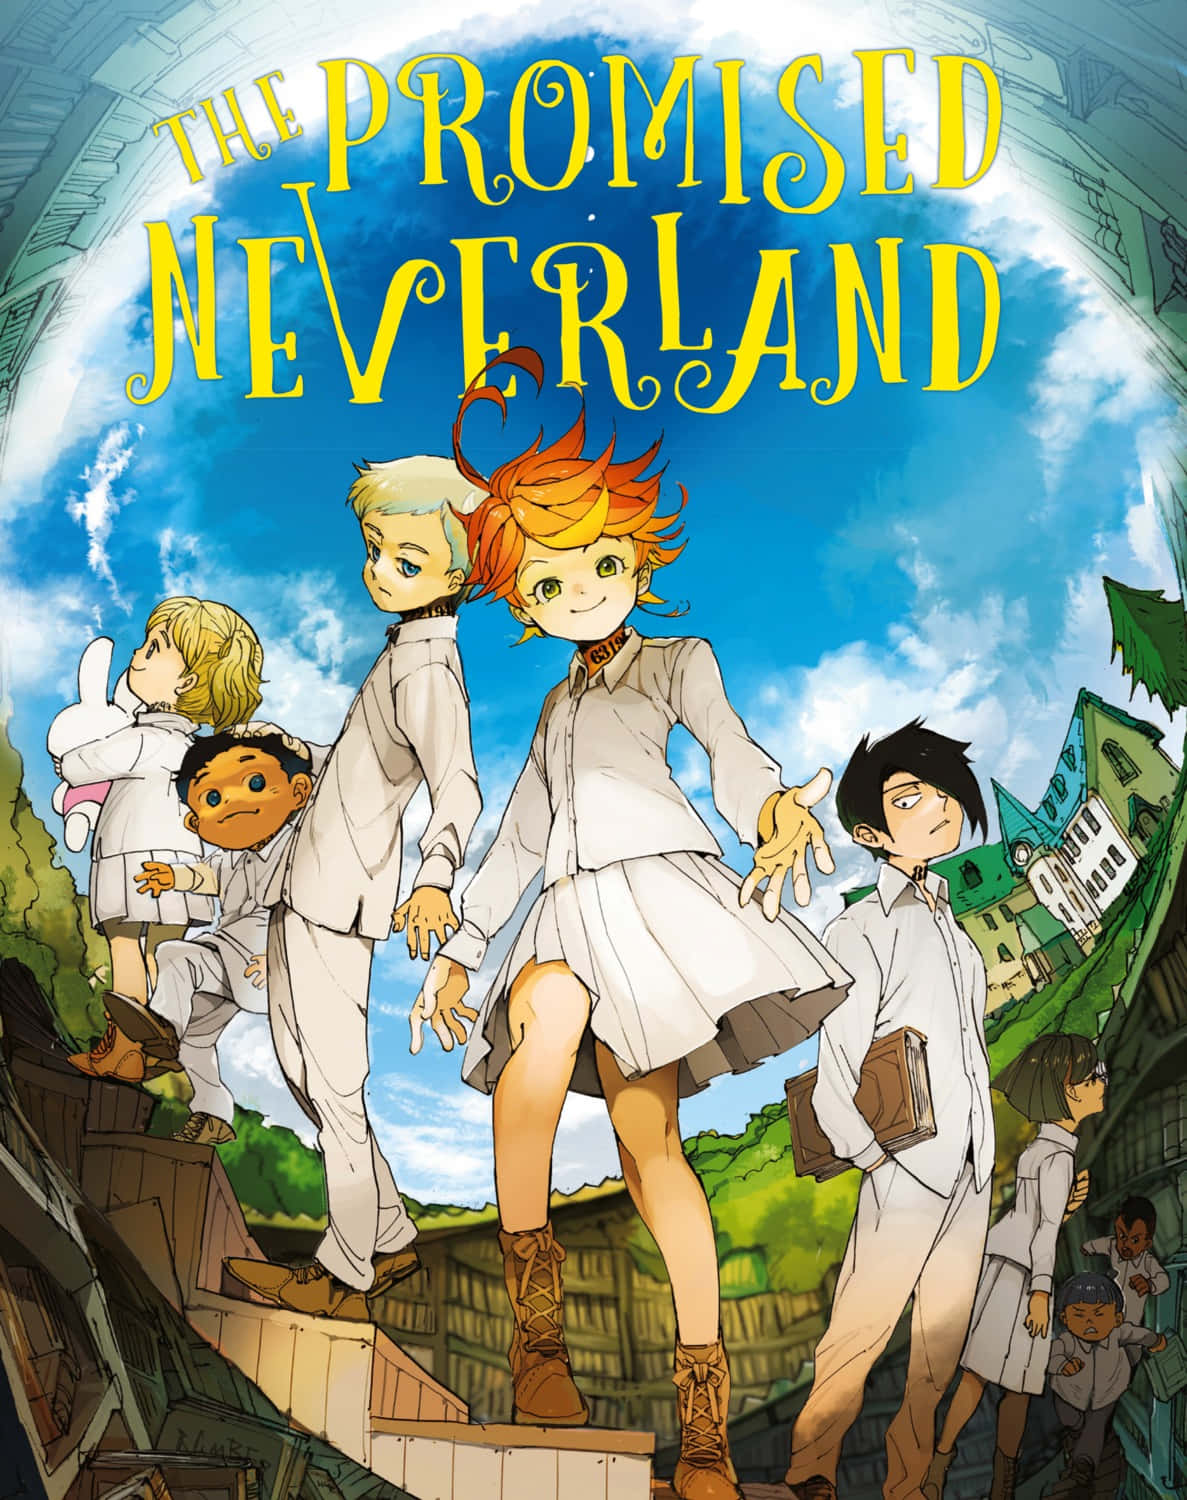 The Promised Neverland, A Children's Book Wallpaper